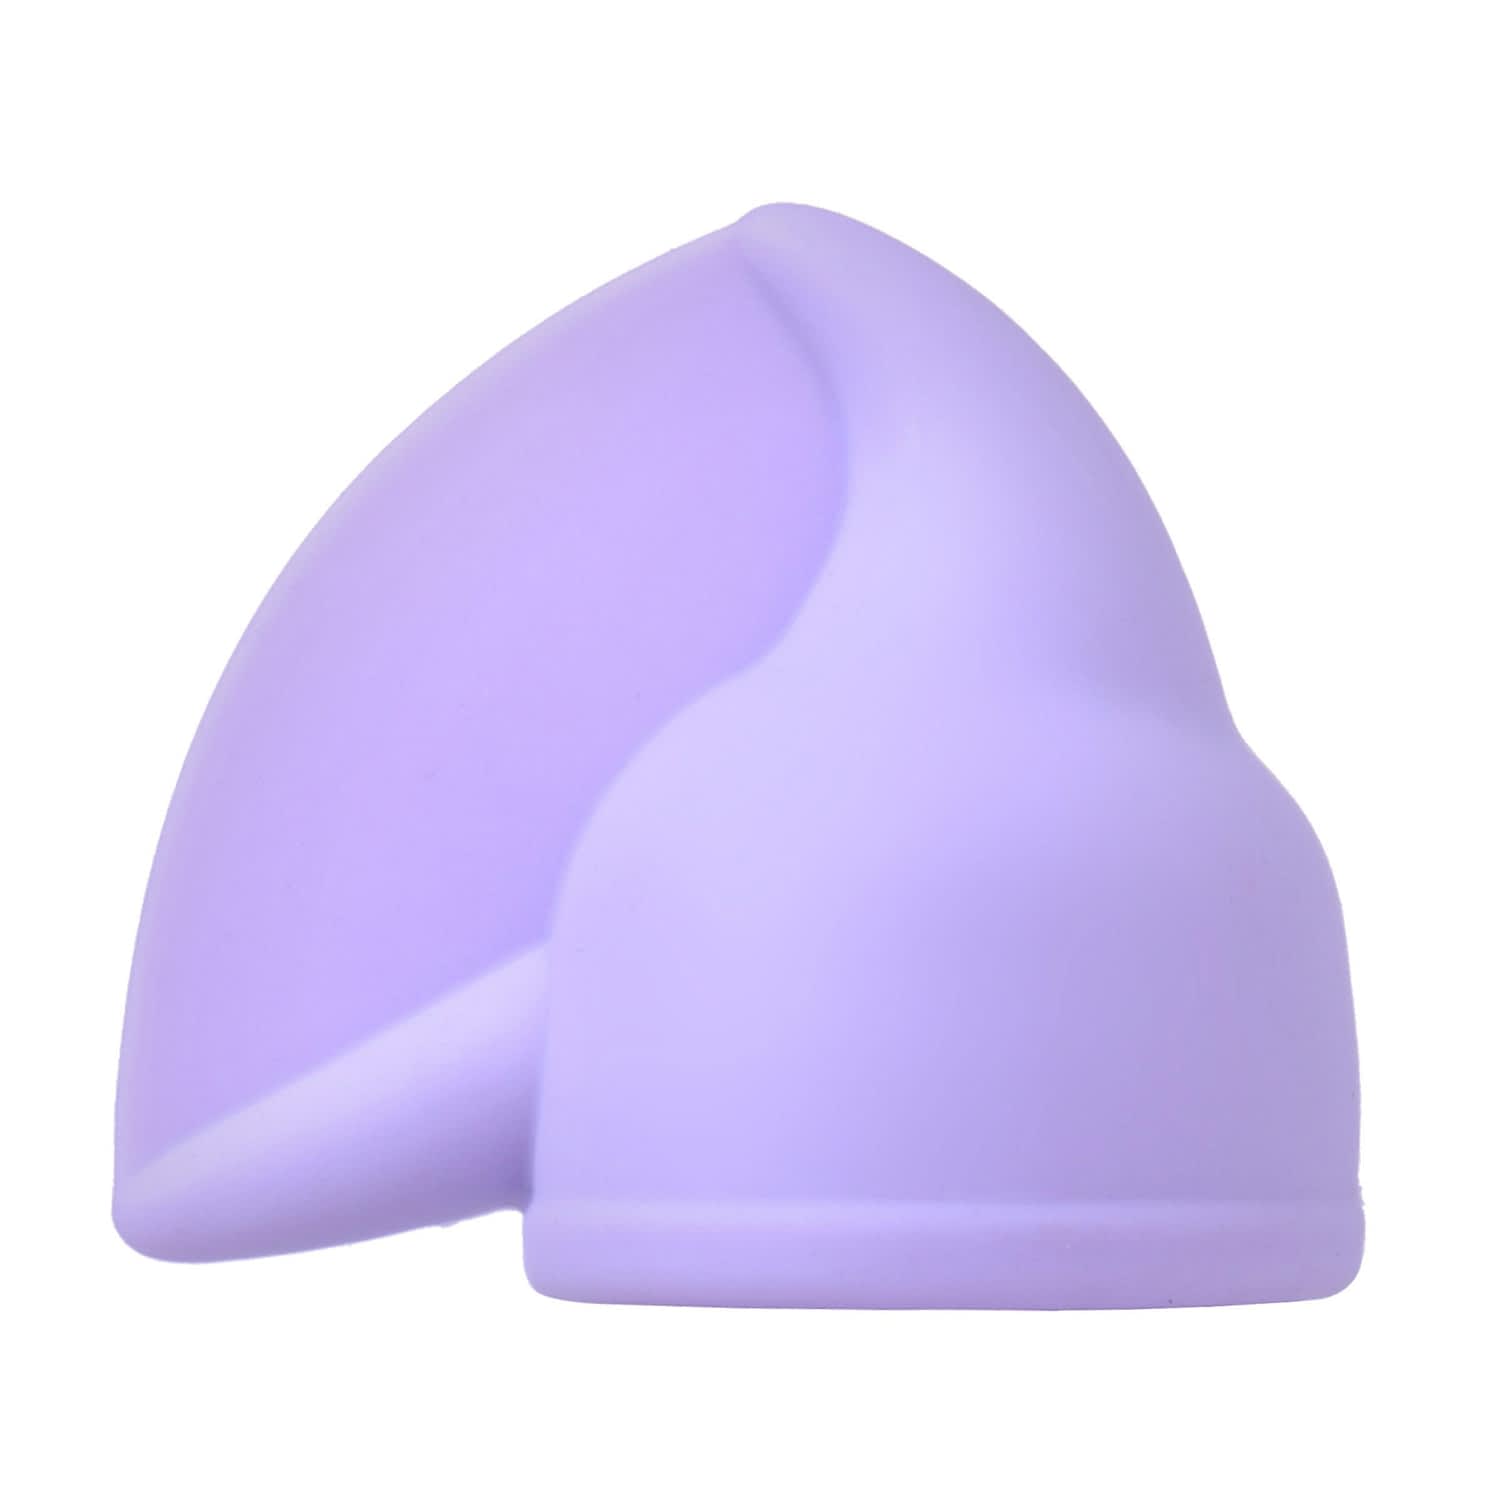 Flutter Tip Silicone Wand Attachment